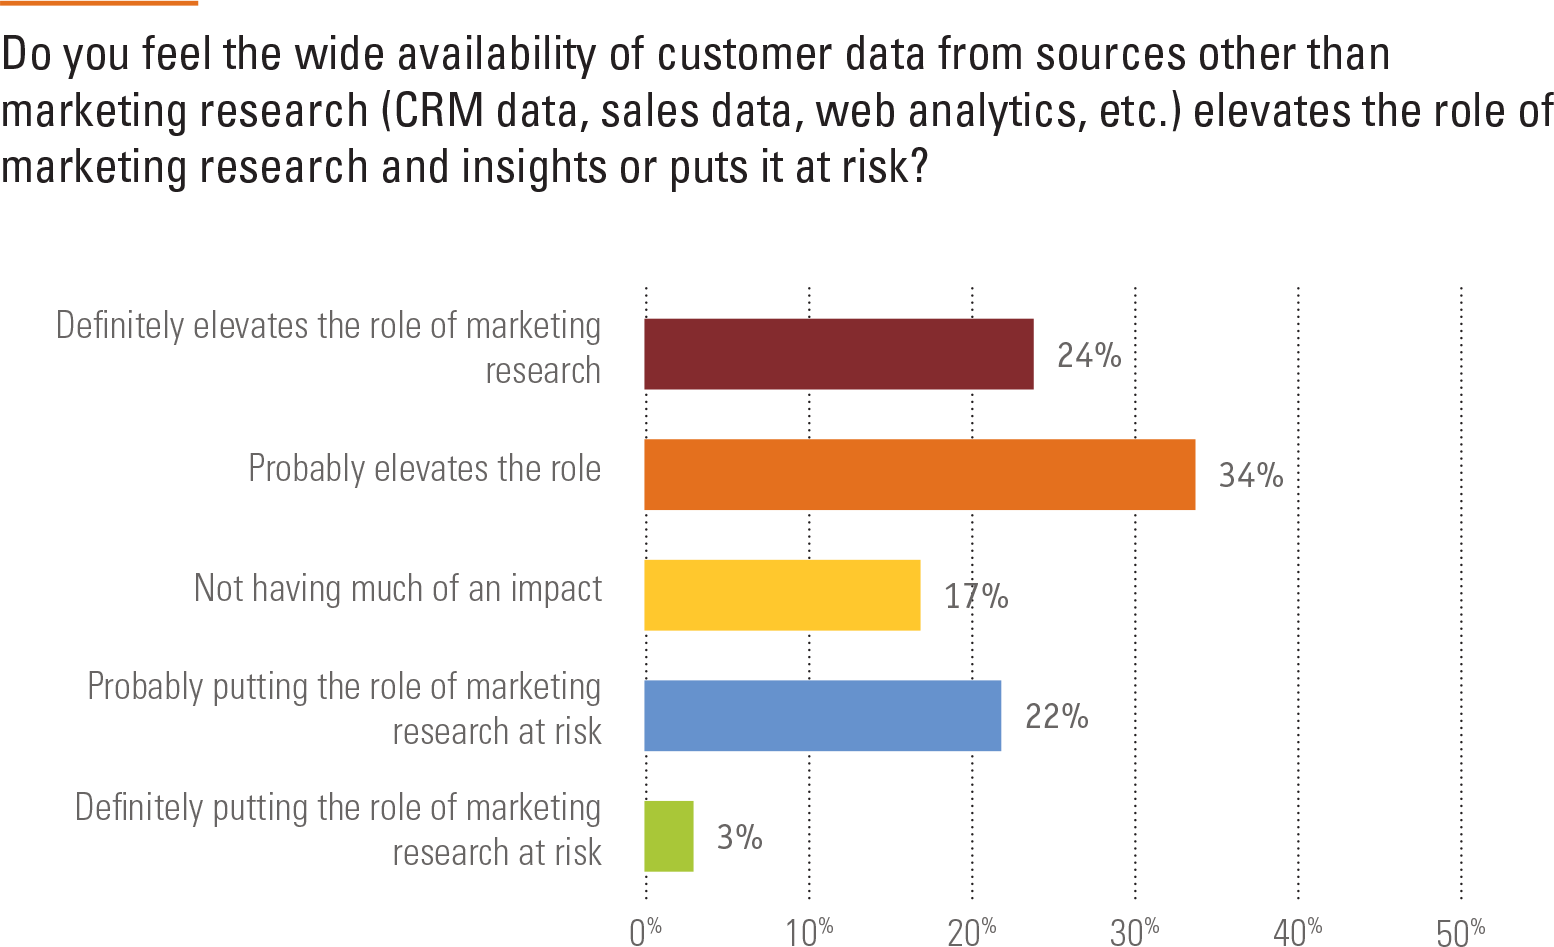 Do you feel the wide availability of customer data from sources other than marketing research (CRM data, sales data, web analytics, etc.) elevates the role of marketing research and insights or puts it at risk?